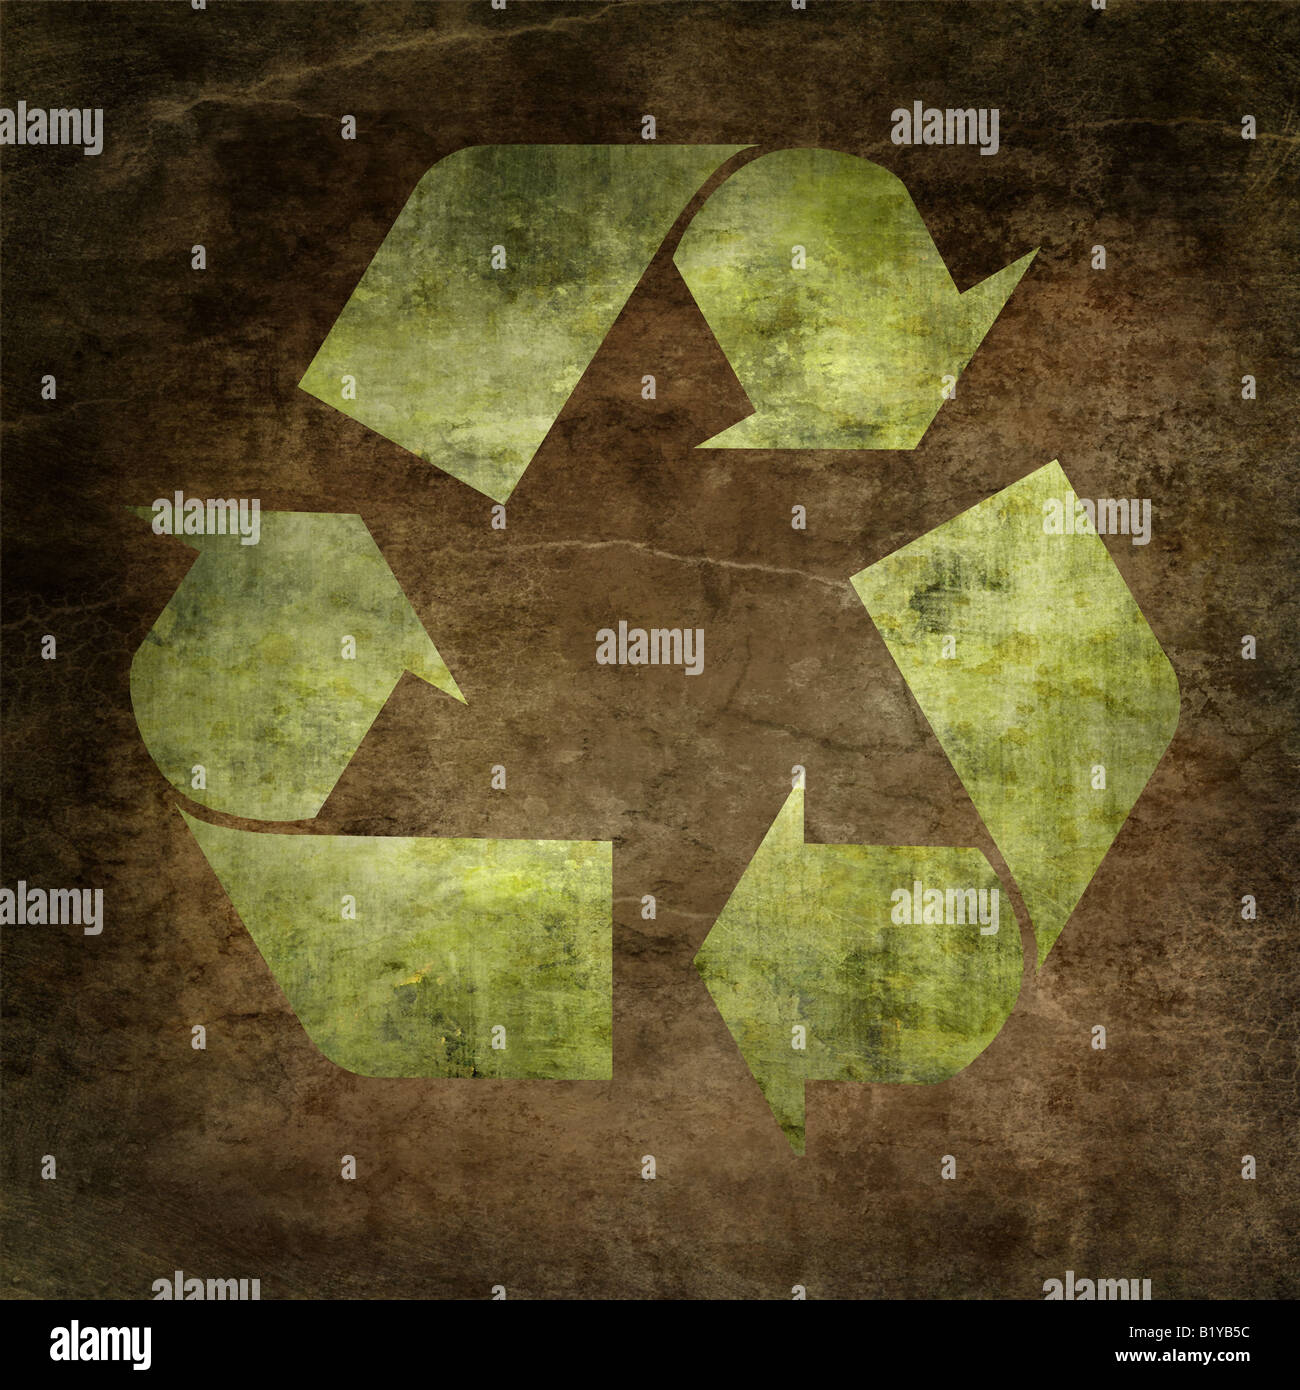 Recycle and ecology conceptual illustration Stock Photo